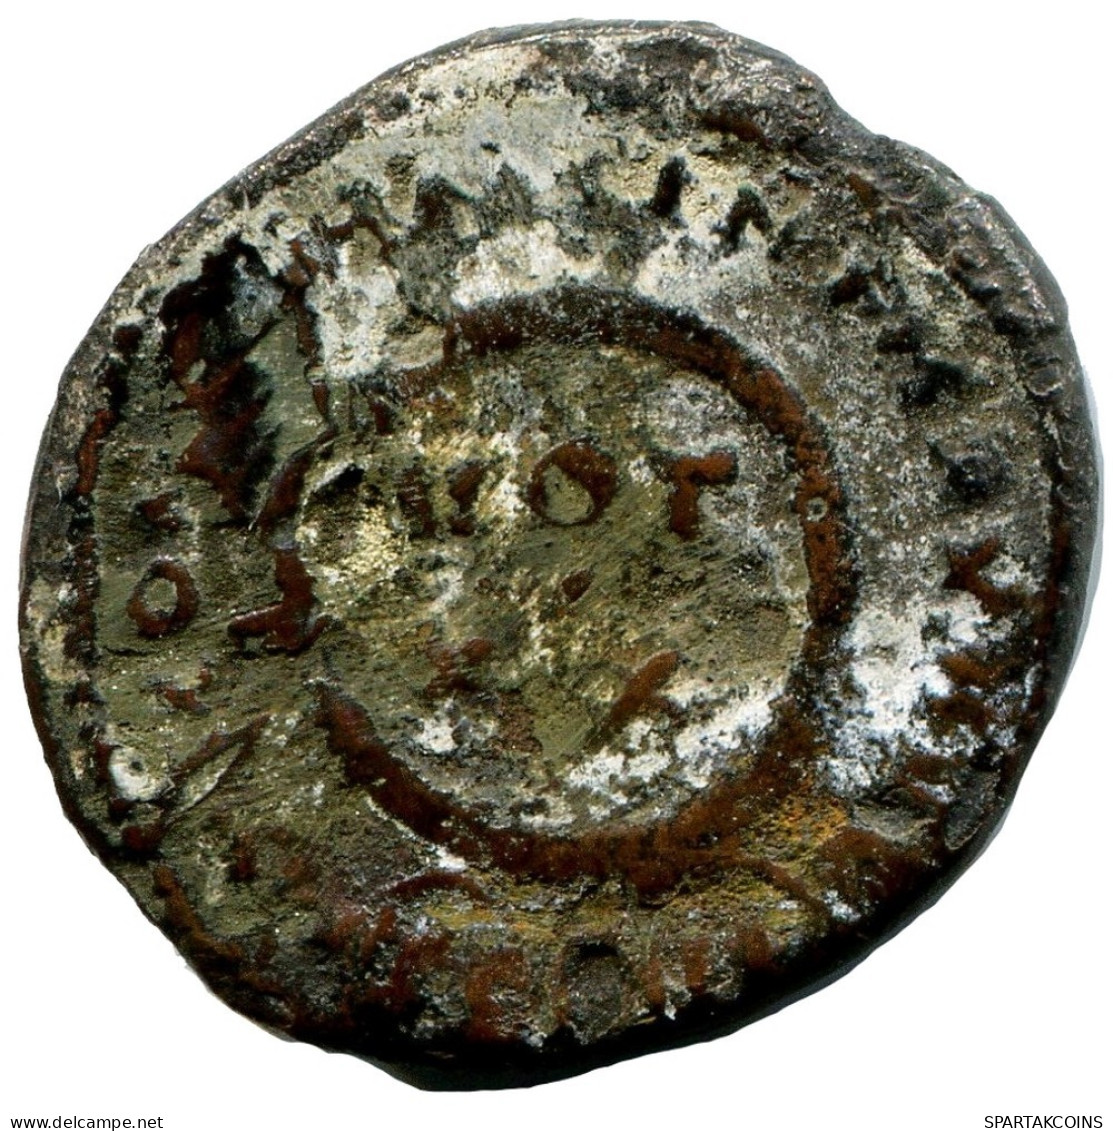 CONSTANTINE I THESSALONICA FROM THE ROYAL ONTARIO MUSEUM #ANC11113.14.D.A - El Imperio Christiano (307 / 363)